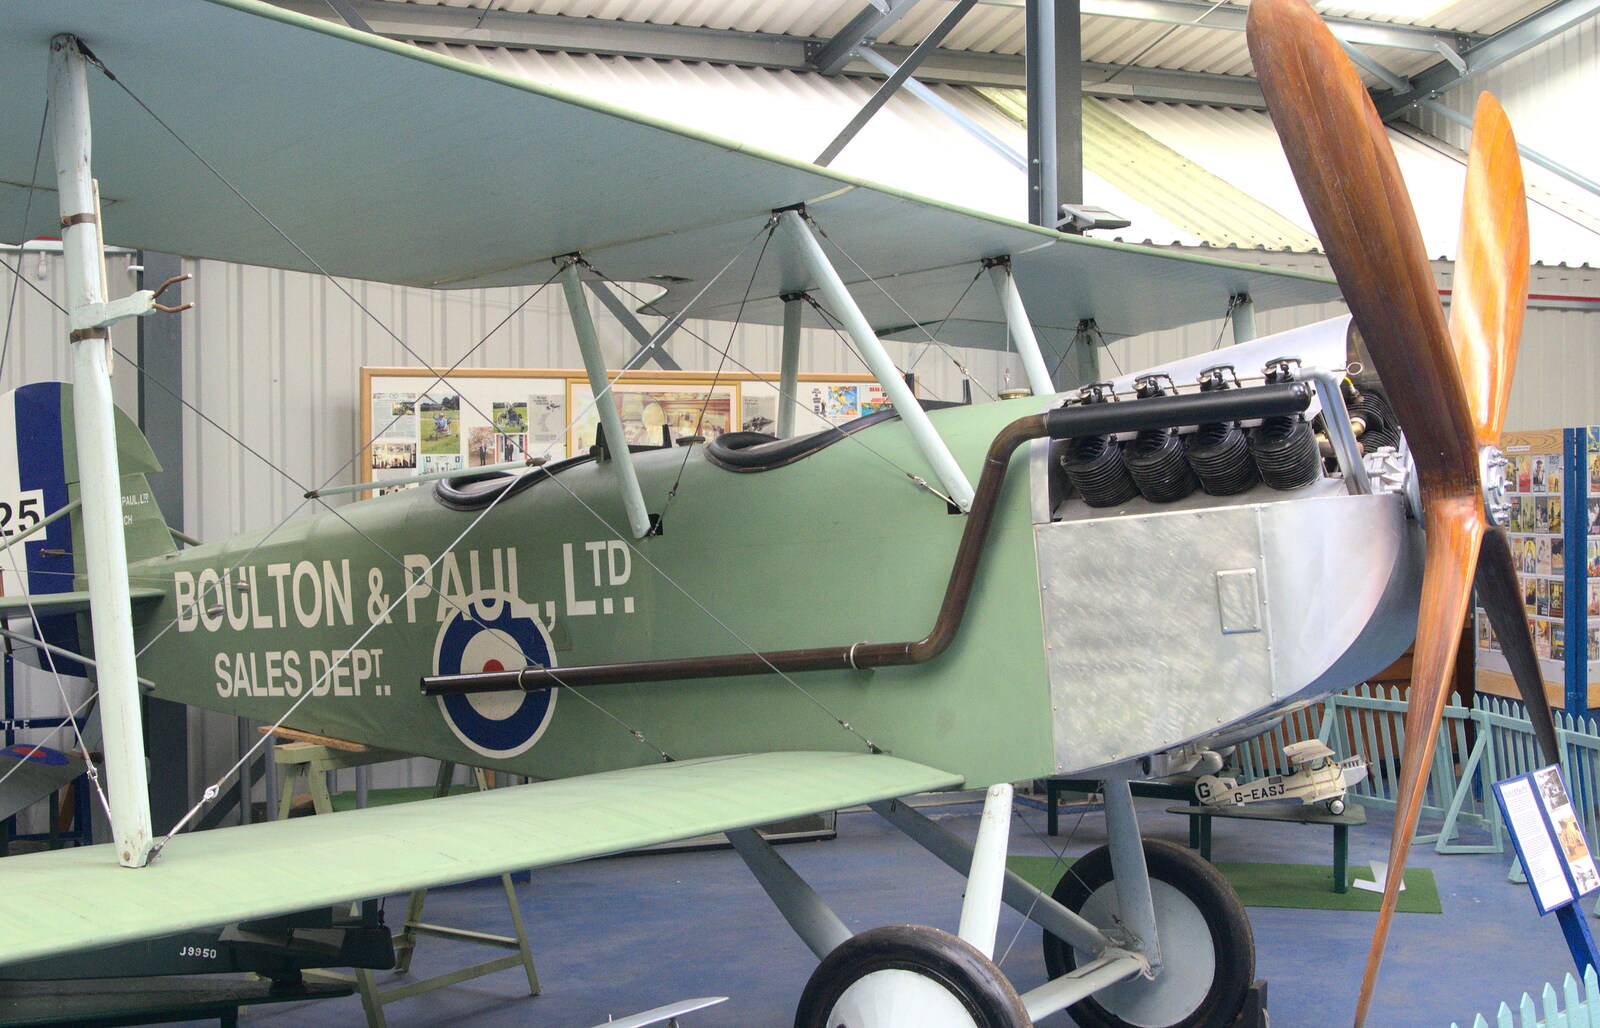 An ancient Boulton and Paul biplane from Norfolk and Suffolk Aviation Museum, Flixton, Suffolk - 30th April 2017